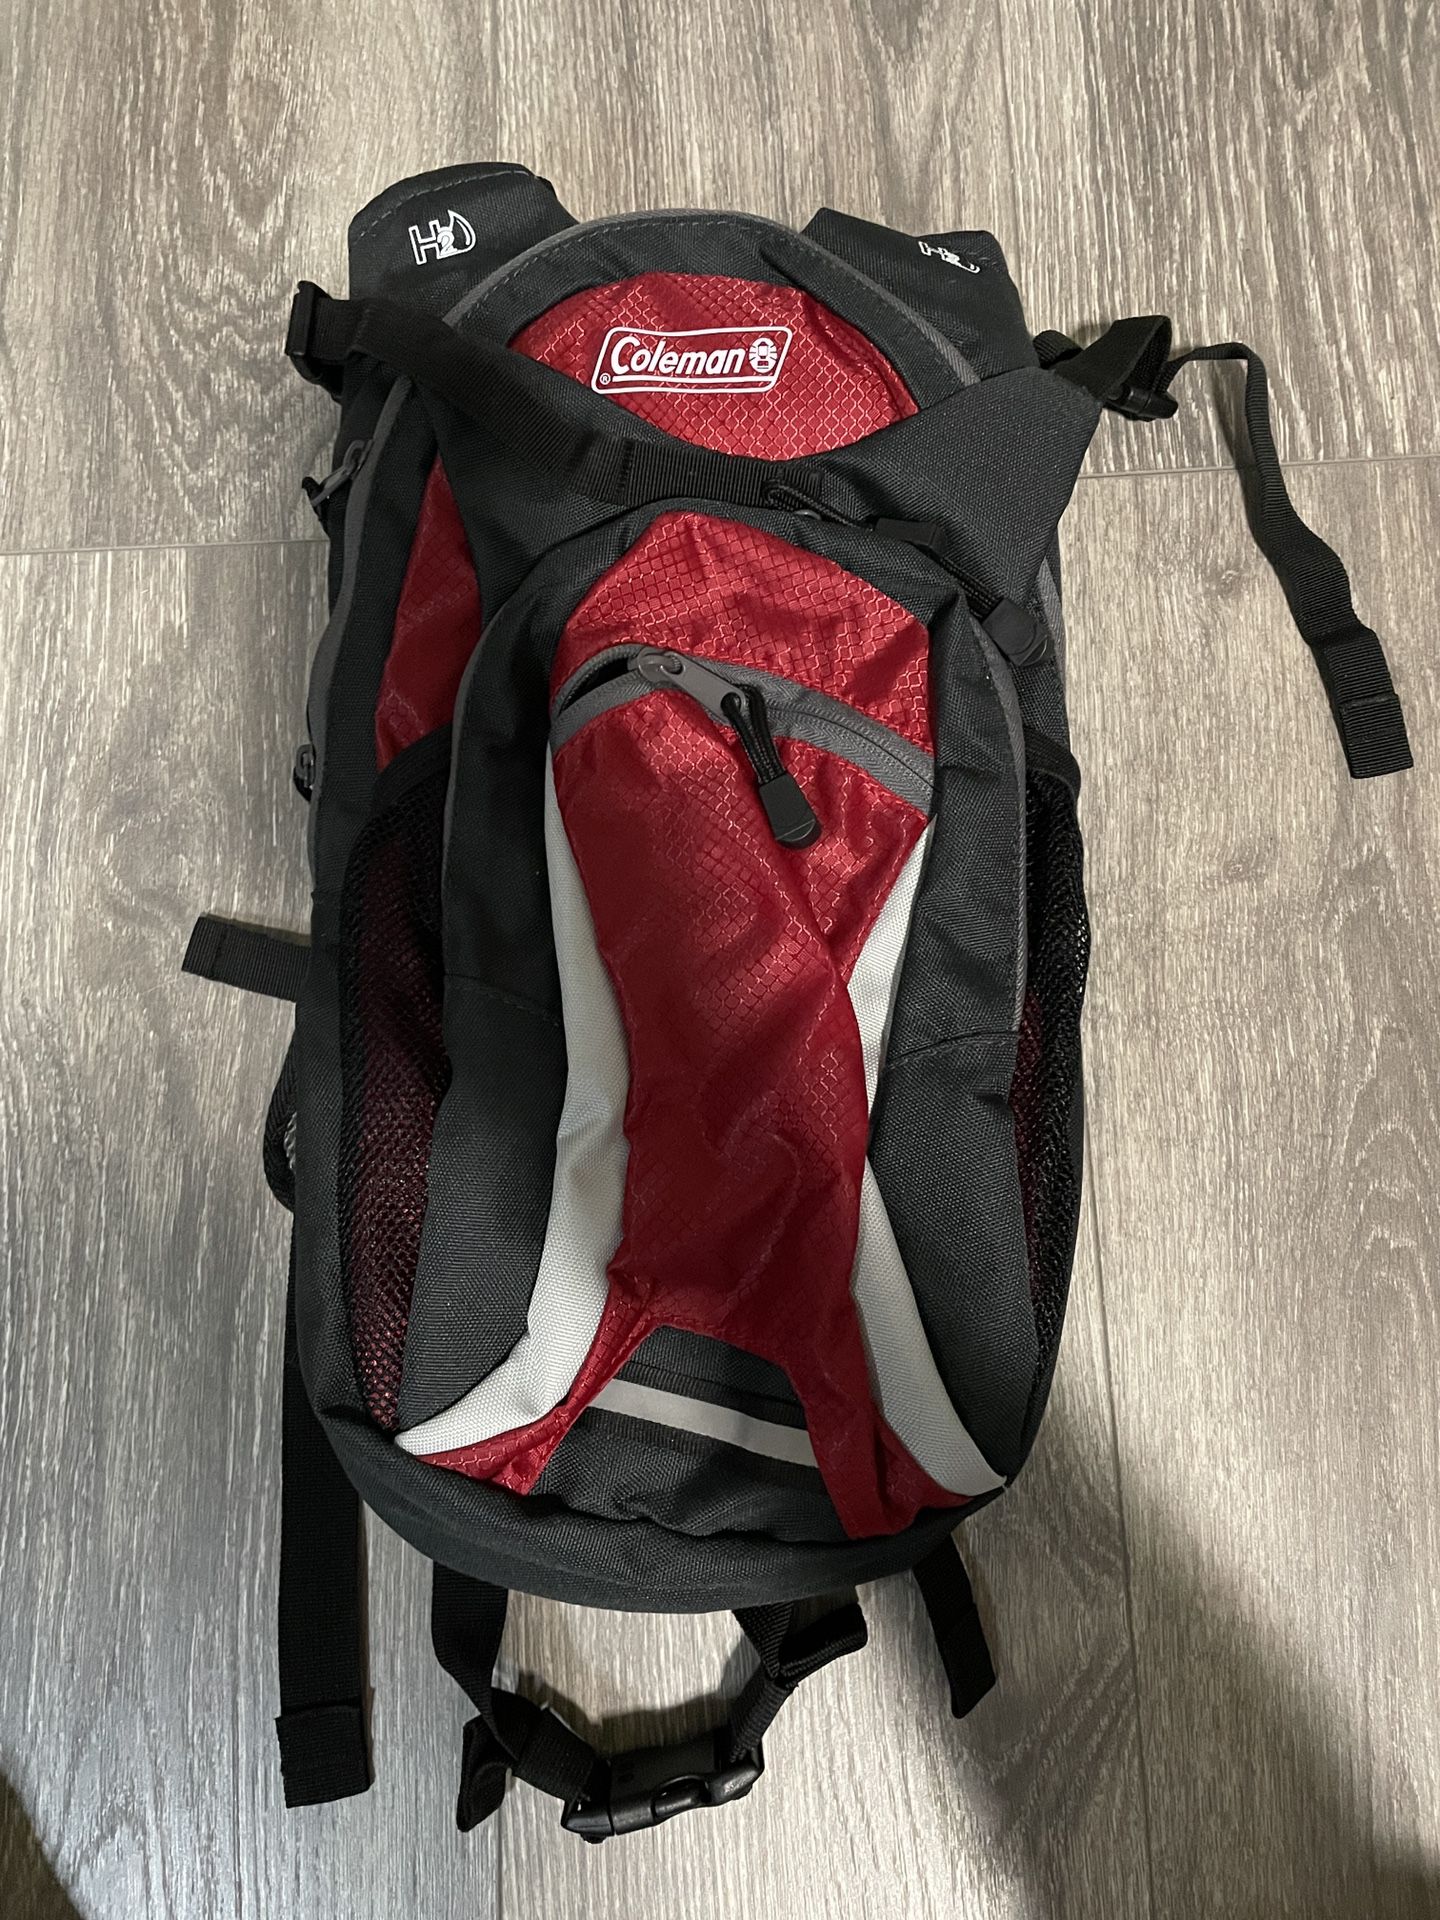 Coleman hydration Backpack